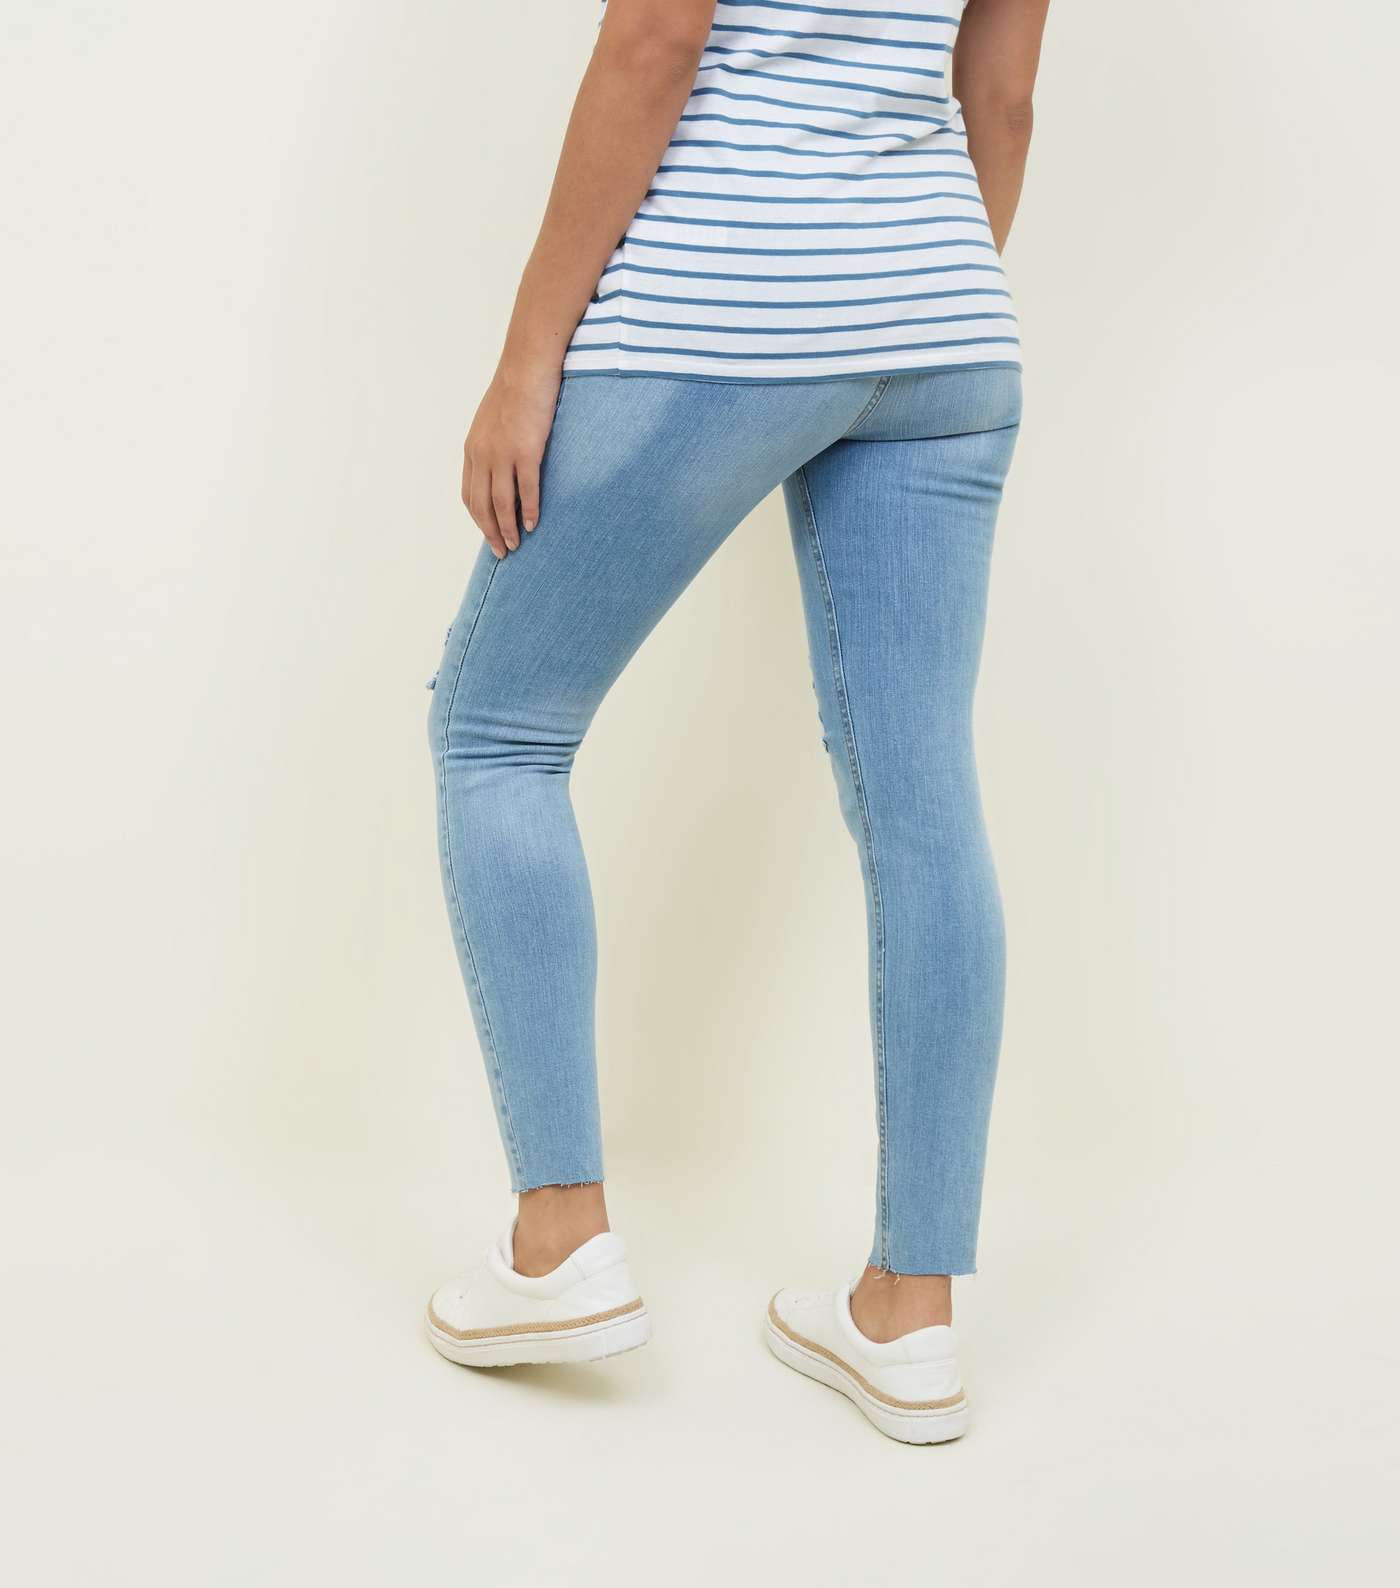 Maternity Bright Blue Under Bump Ripped Skinny Jeans Image 3